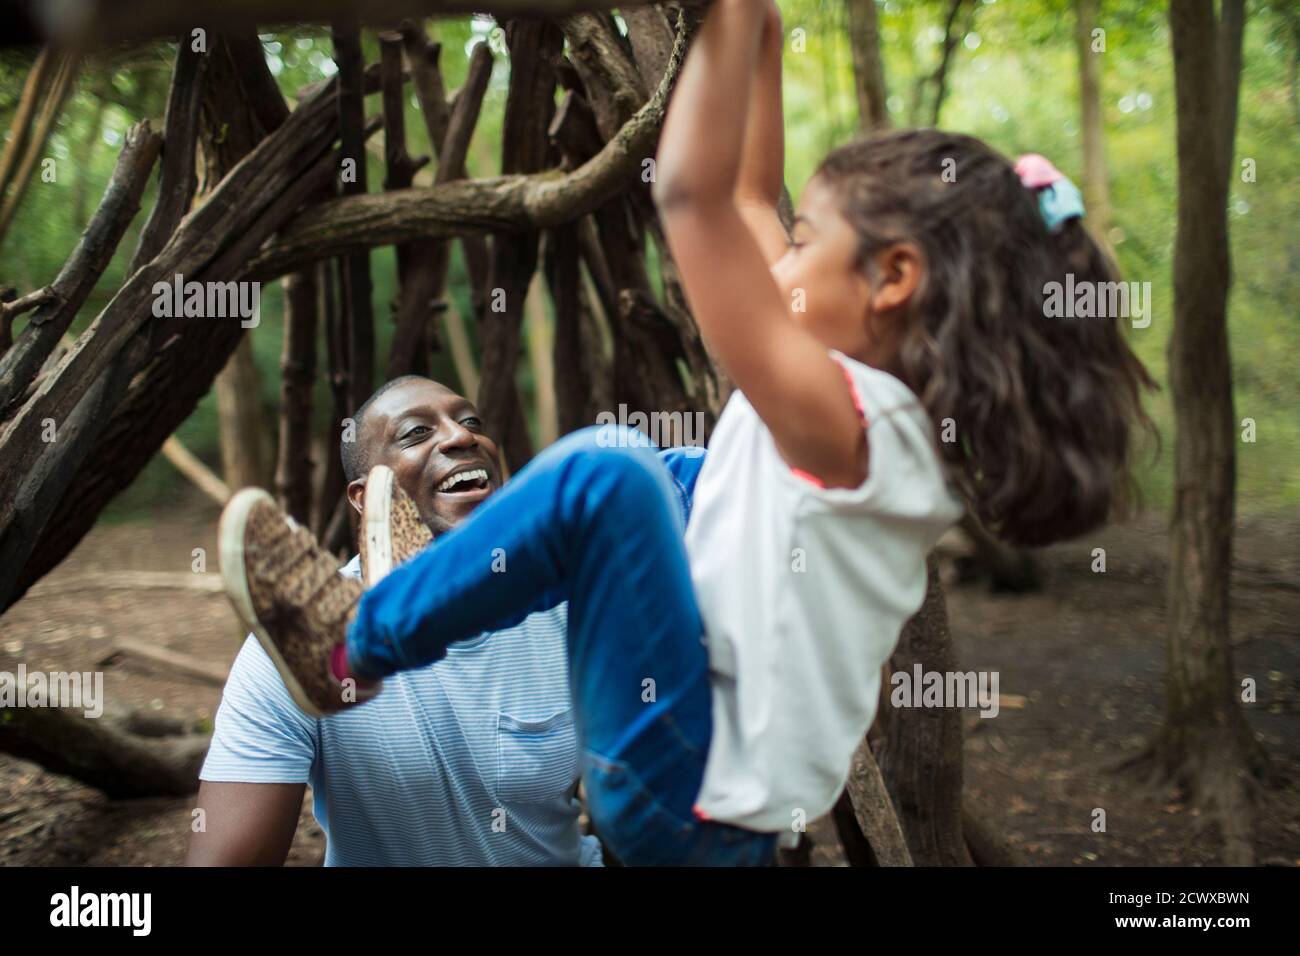 Father watching daughter hang from branch in woods Stock Photo